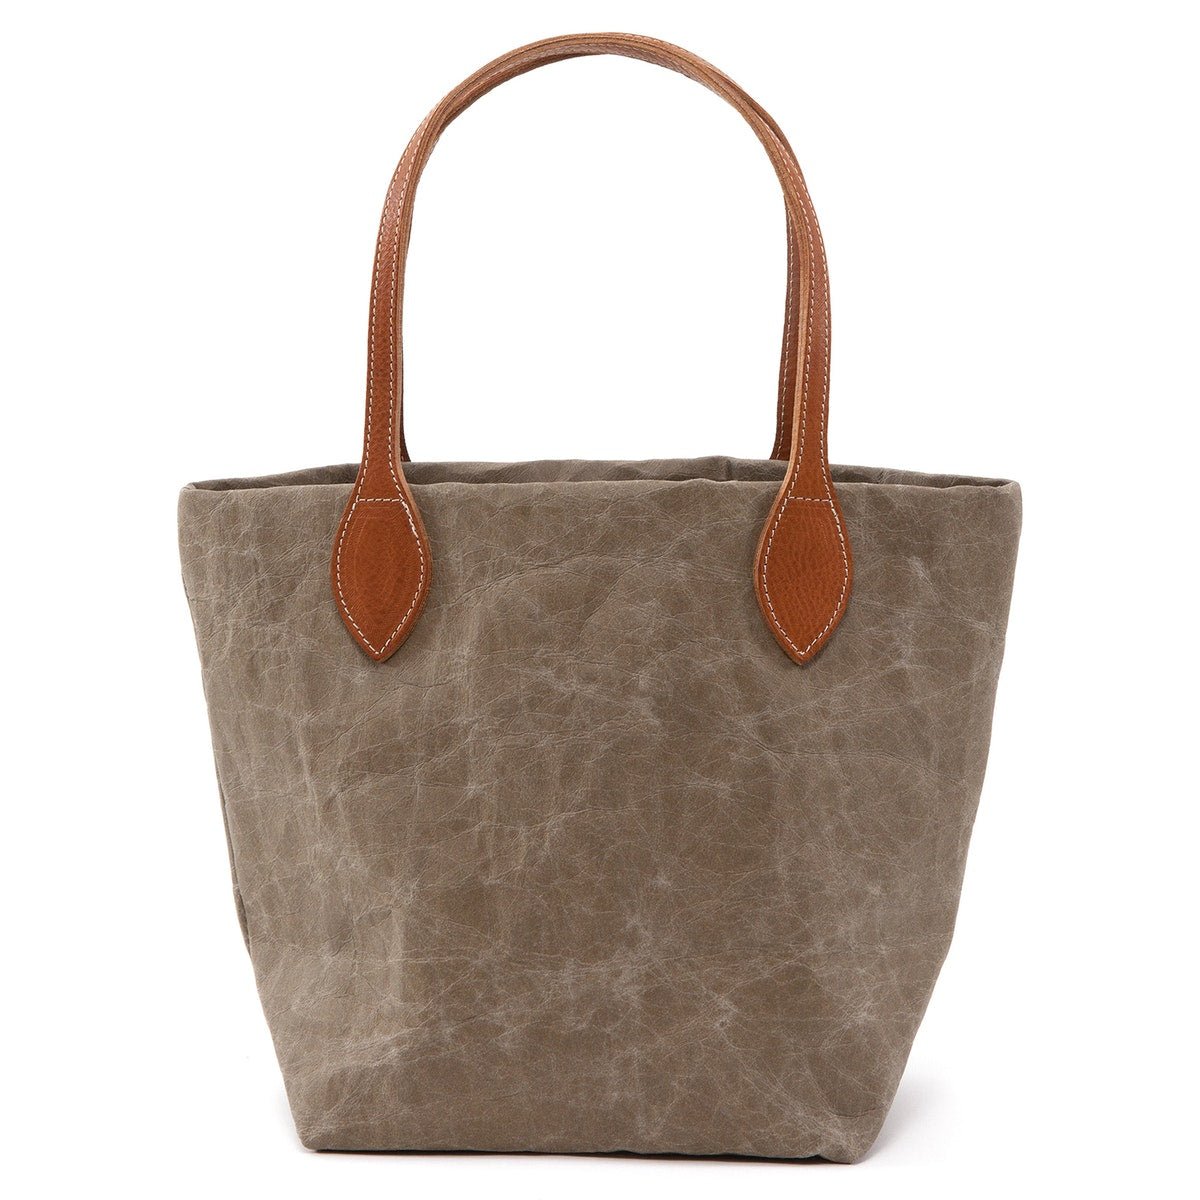 A small washable paper tote is shown. It has two long tan leather handles. The bag shown is in an olive colour.